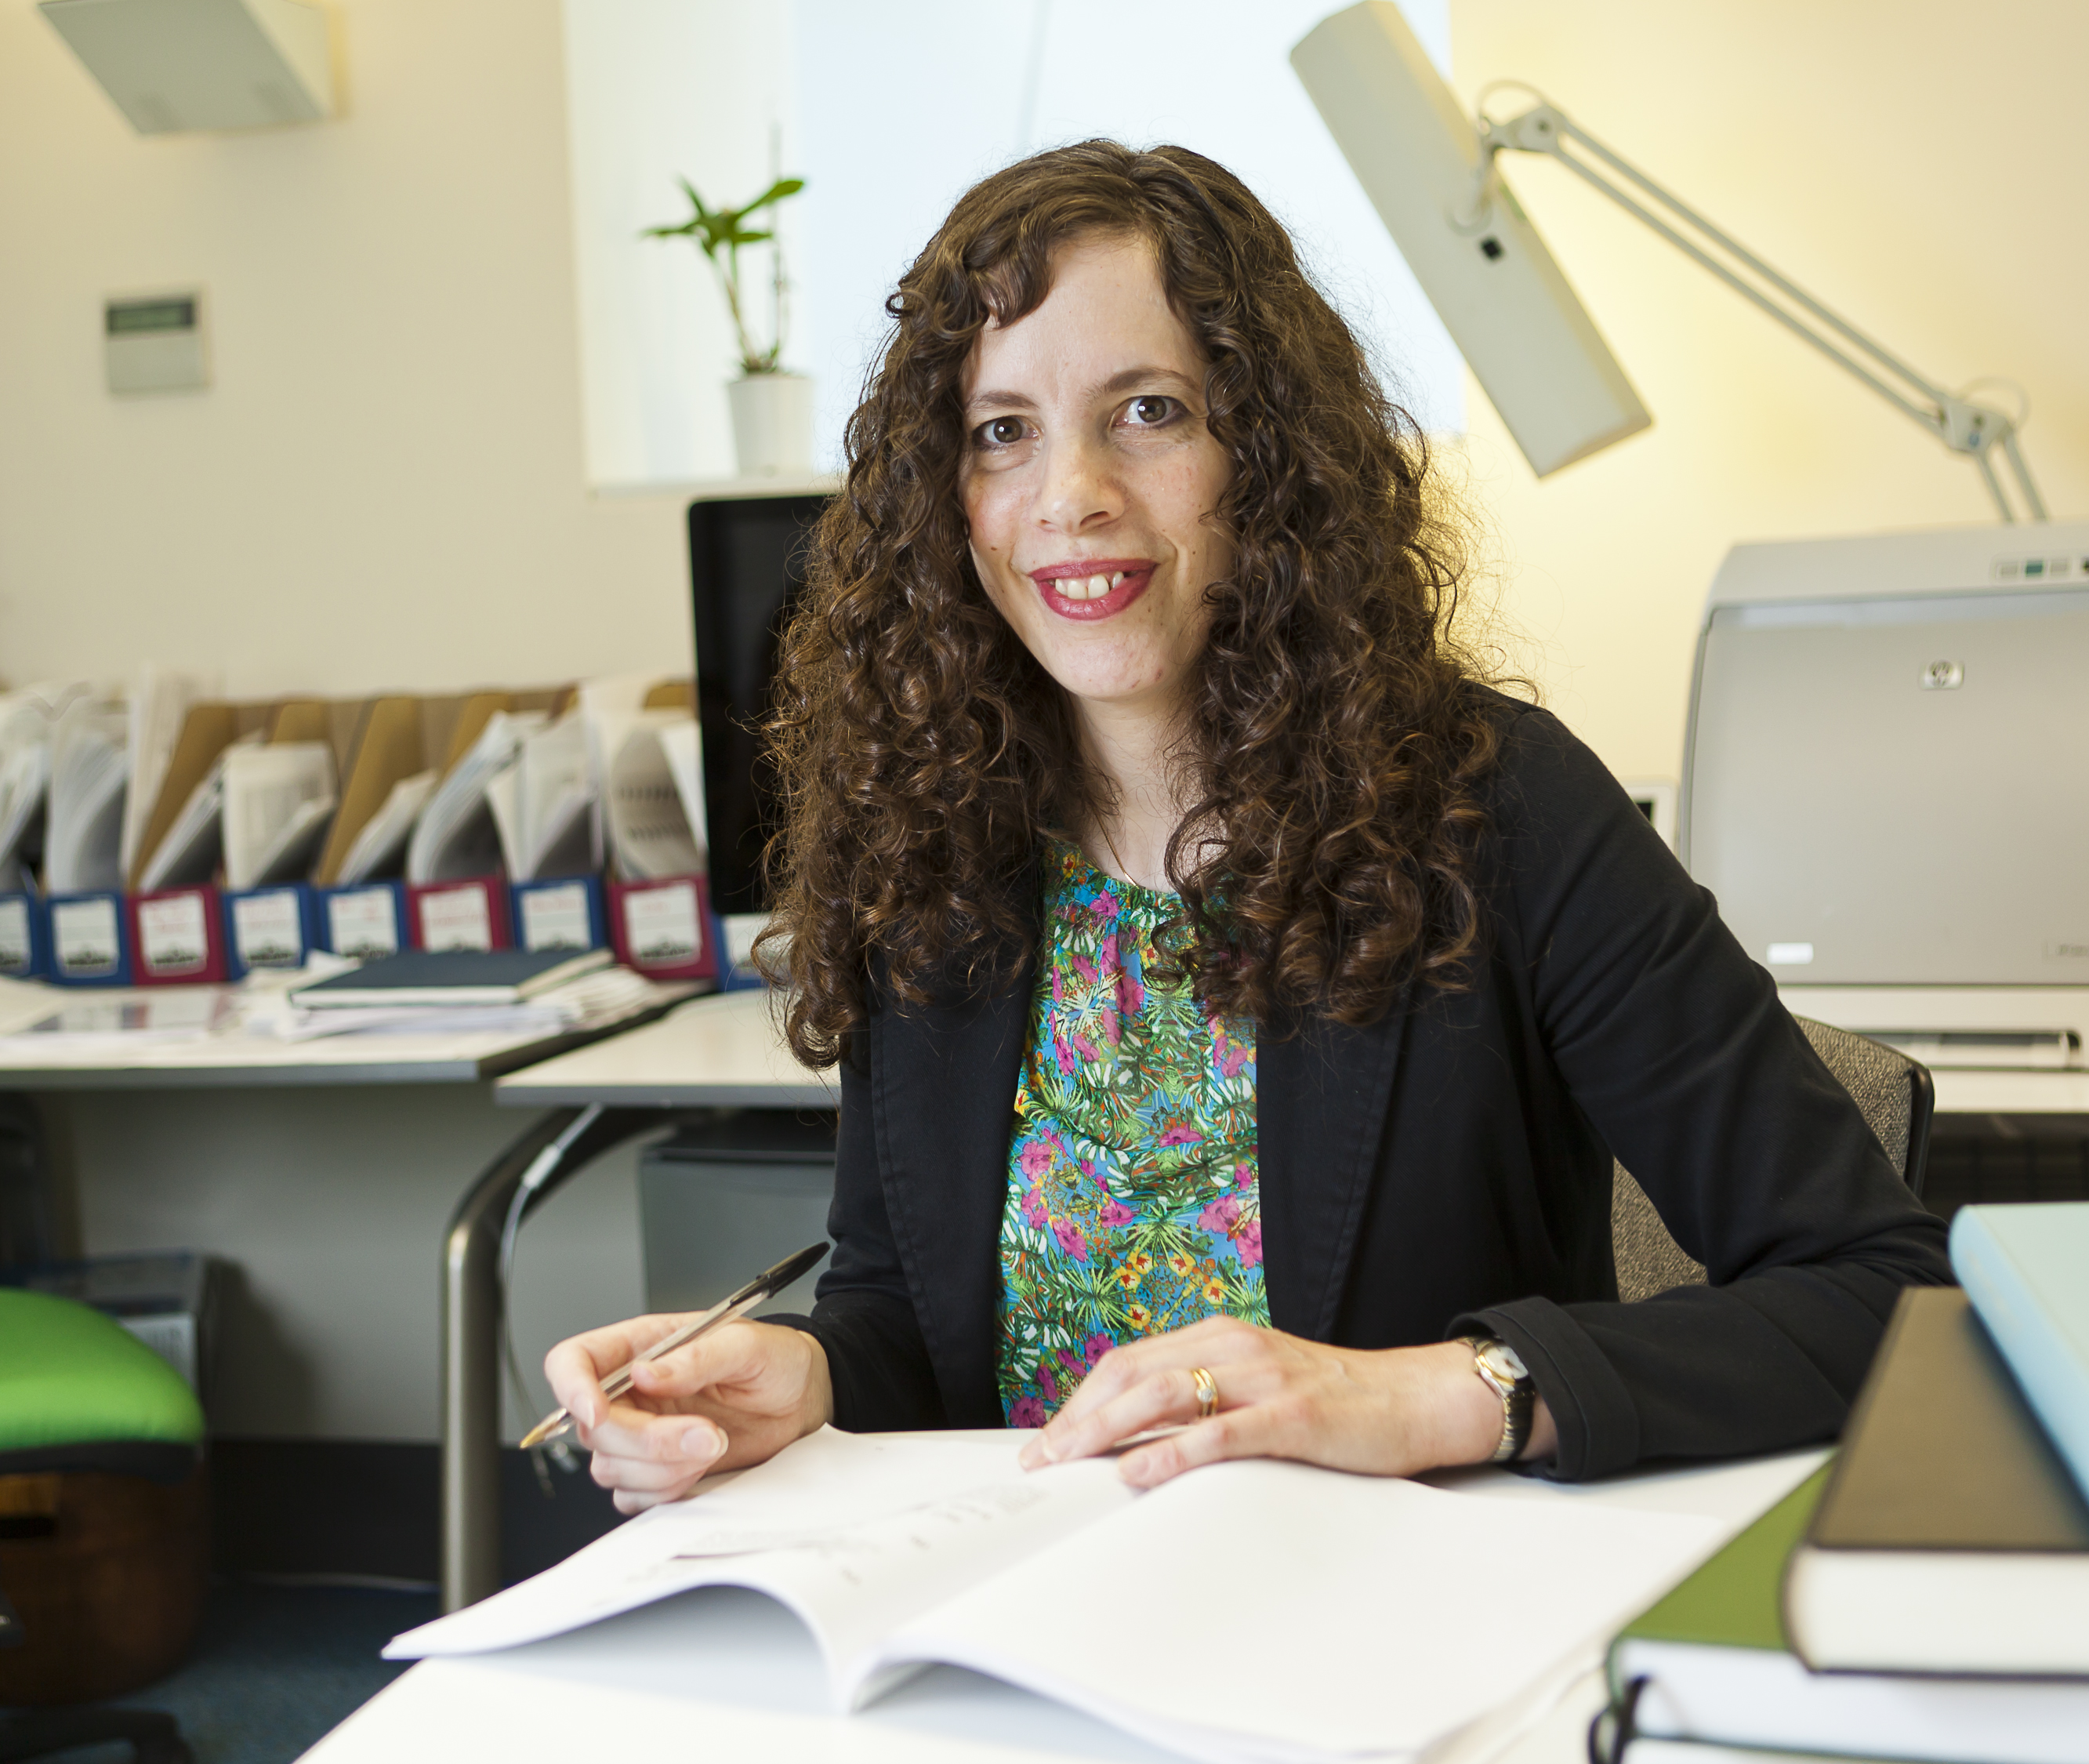 Our Head of Department Prof. Laura Itzhaki